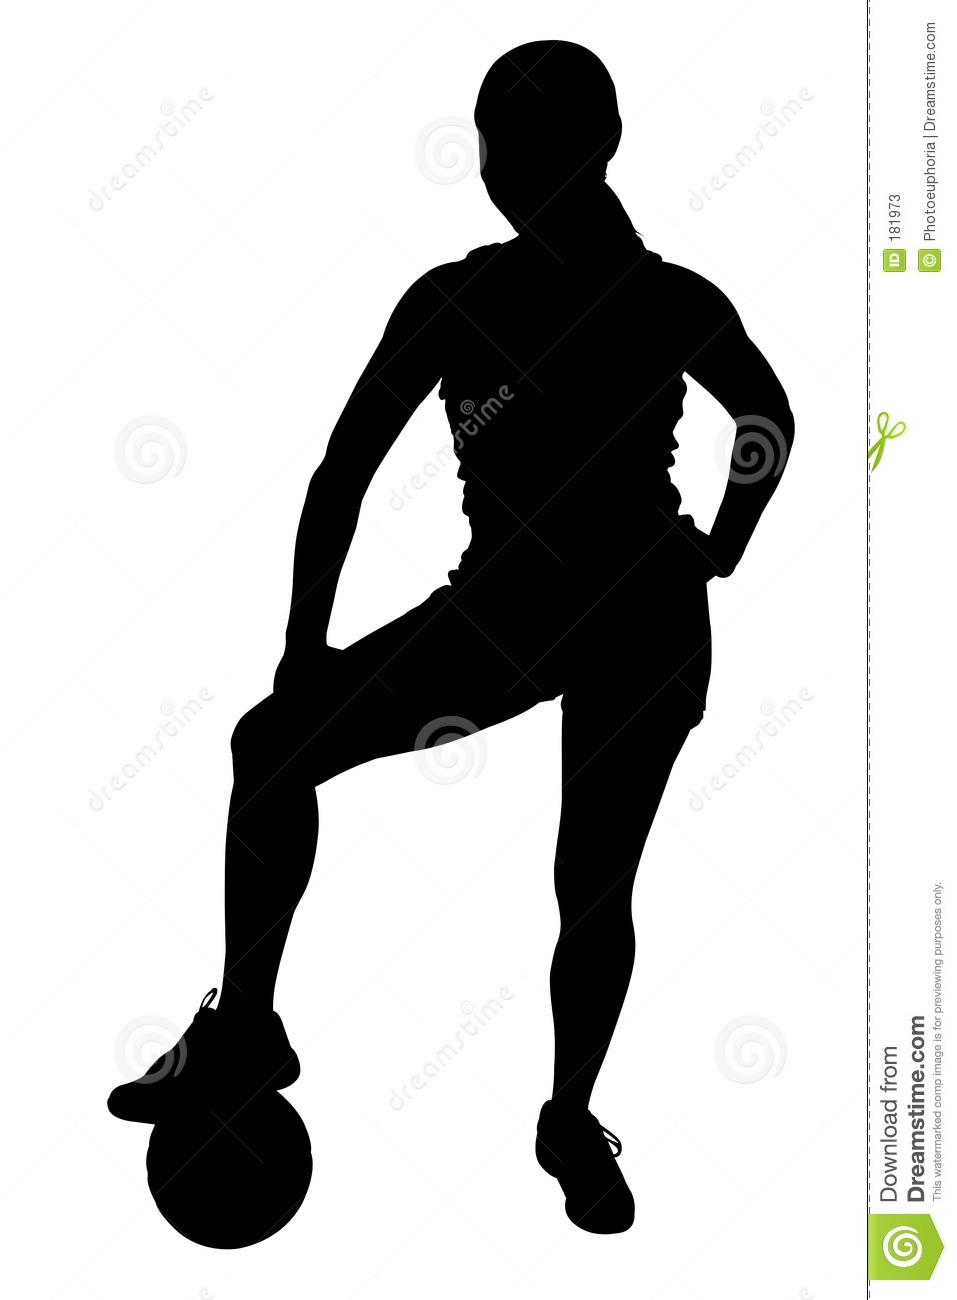 Silhouette With Clipping Path Of Woman With Foot On Basketball Stock    